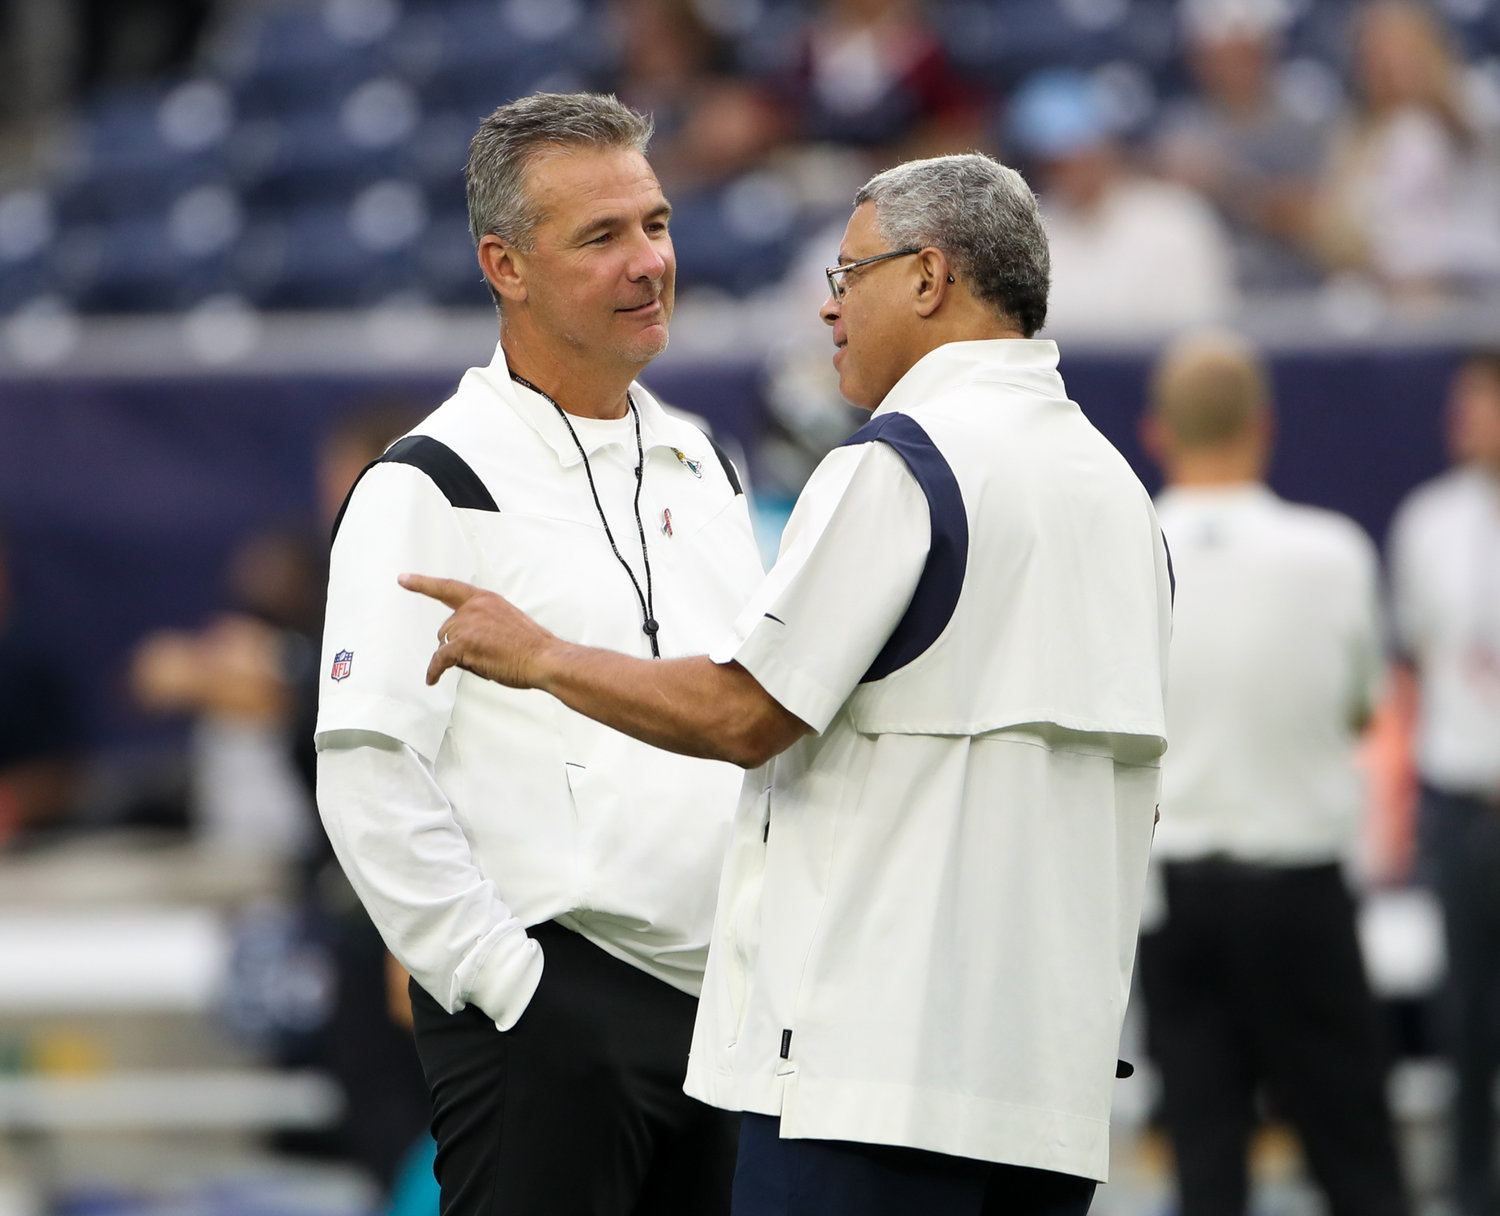 Jacksonville Jaguars head coach Urban Meyer (left) talks with Houston Texans head coach David Culley before the start of an NFL game between the Houston Texans and the Jacksonville Jaguars on September 12, 2021 in Houston, Texas.